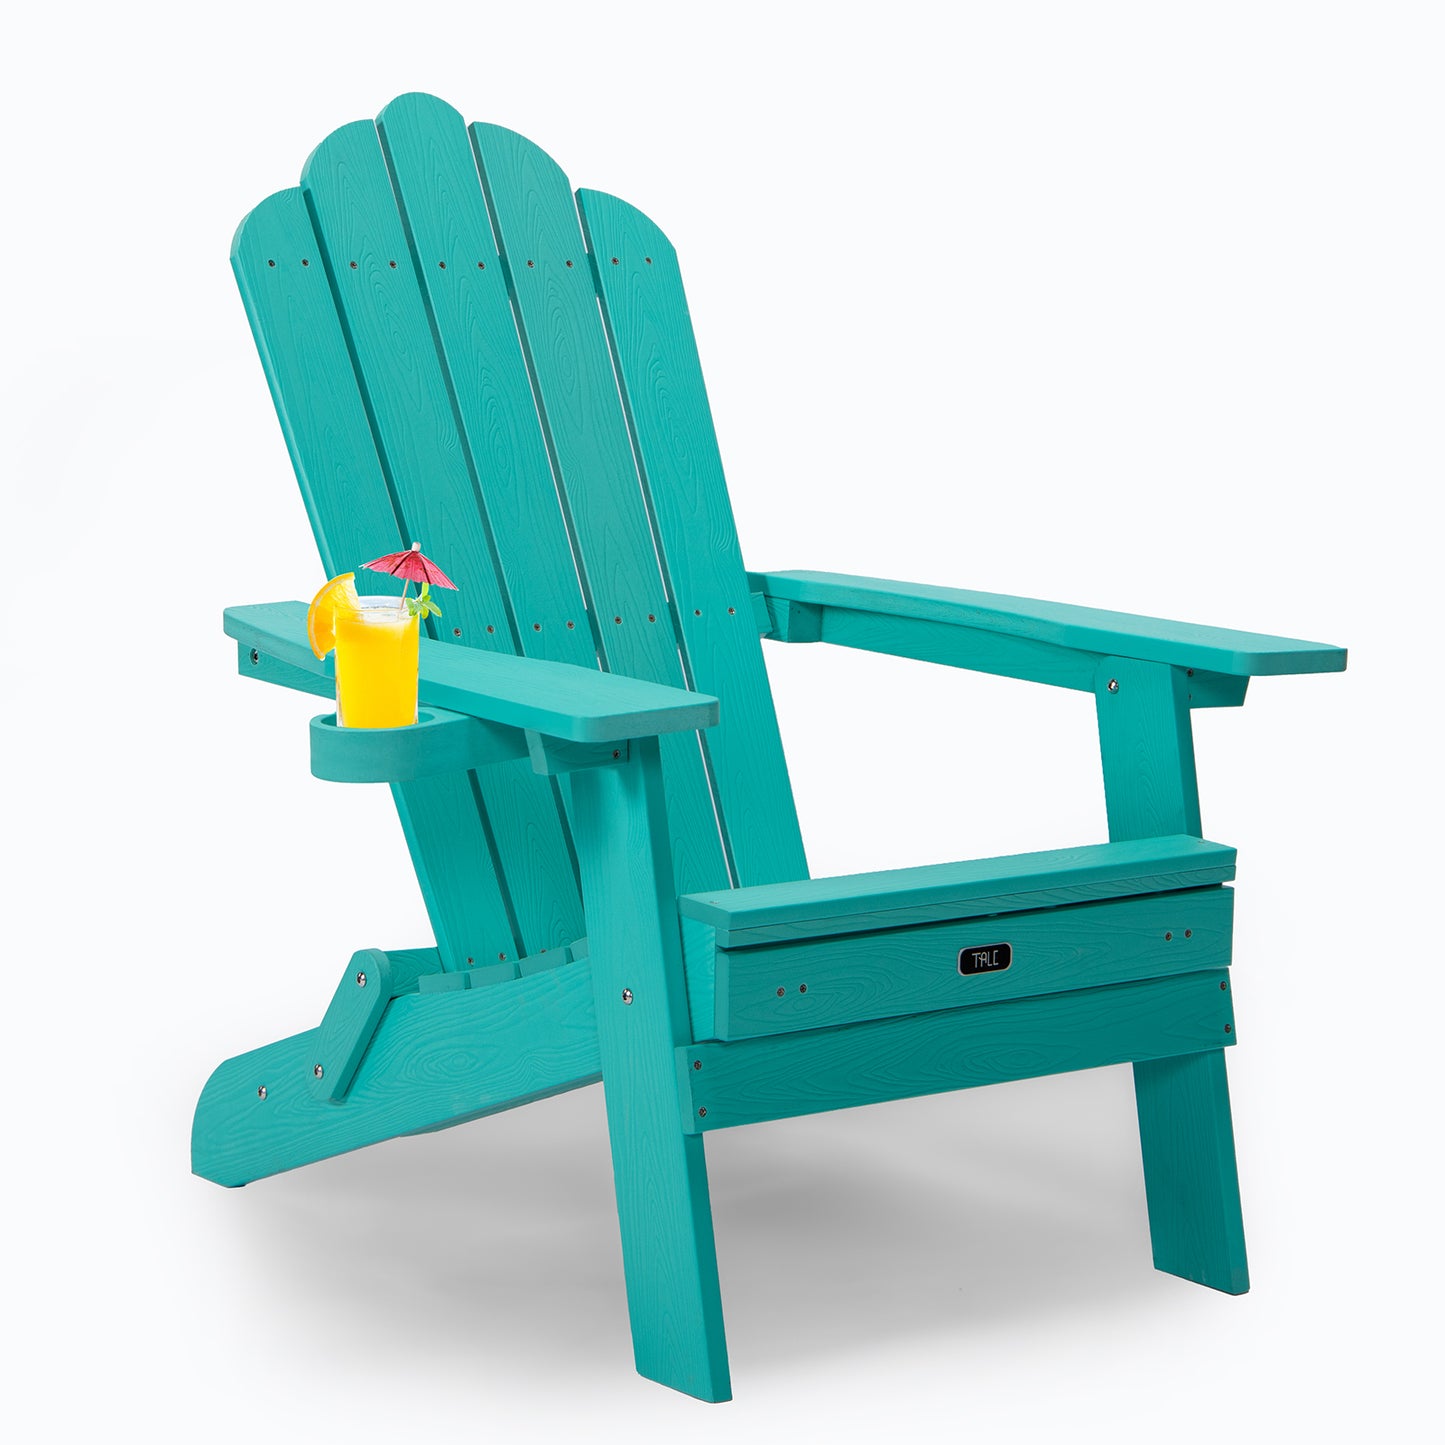 TALE Folding Adirondack Chair with Pullout Ottoman with Cup Holder, Weather Resistant, Oversized, Poly Lumber, Lawn Outdoor Fire Pit Chairs, for Patio Deck Garden, Backyard, Aruba Blue